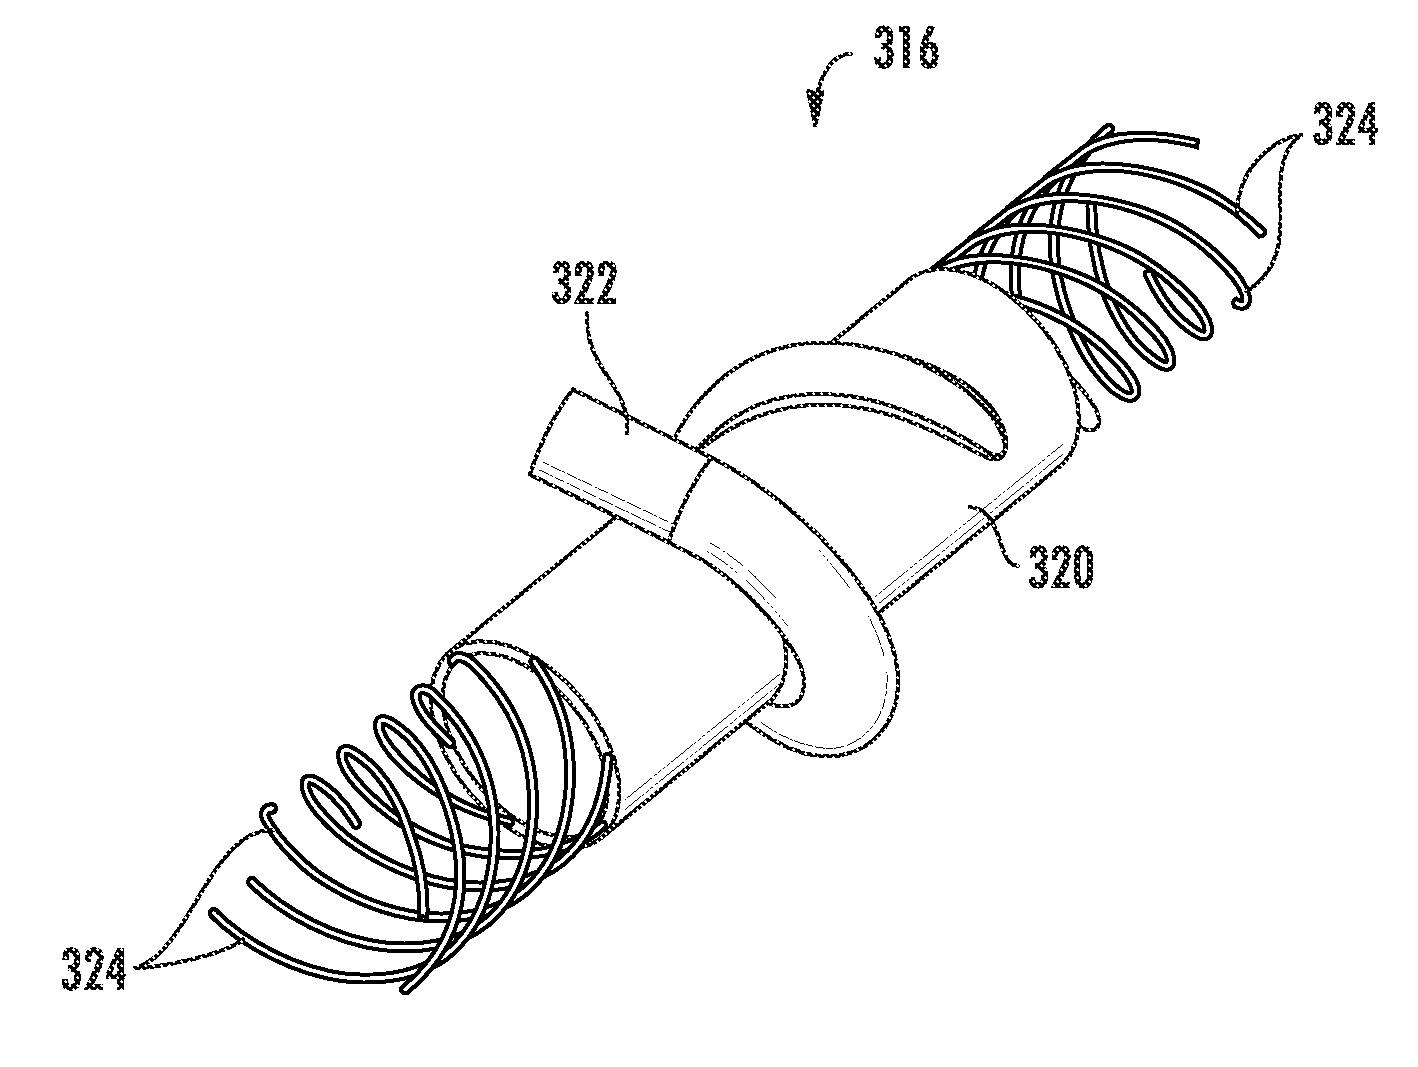 Method and apparatus for bypass graft